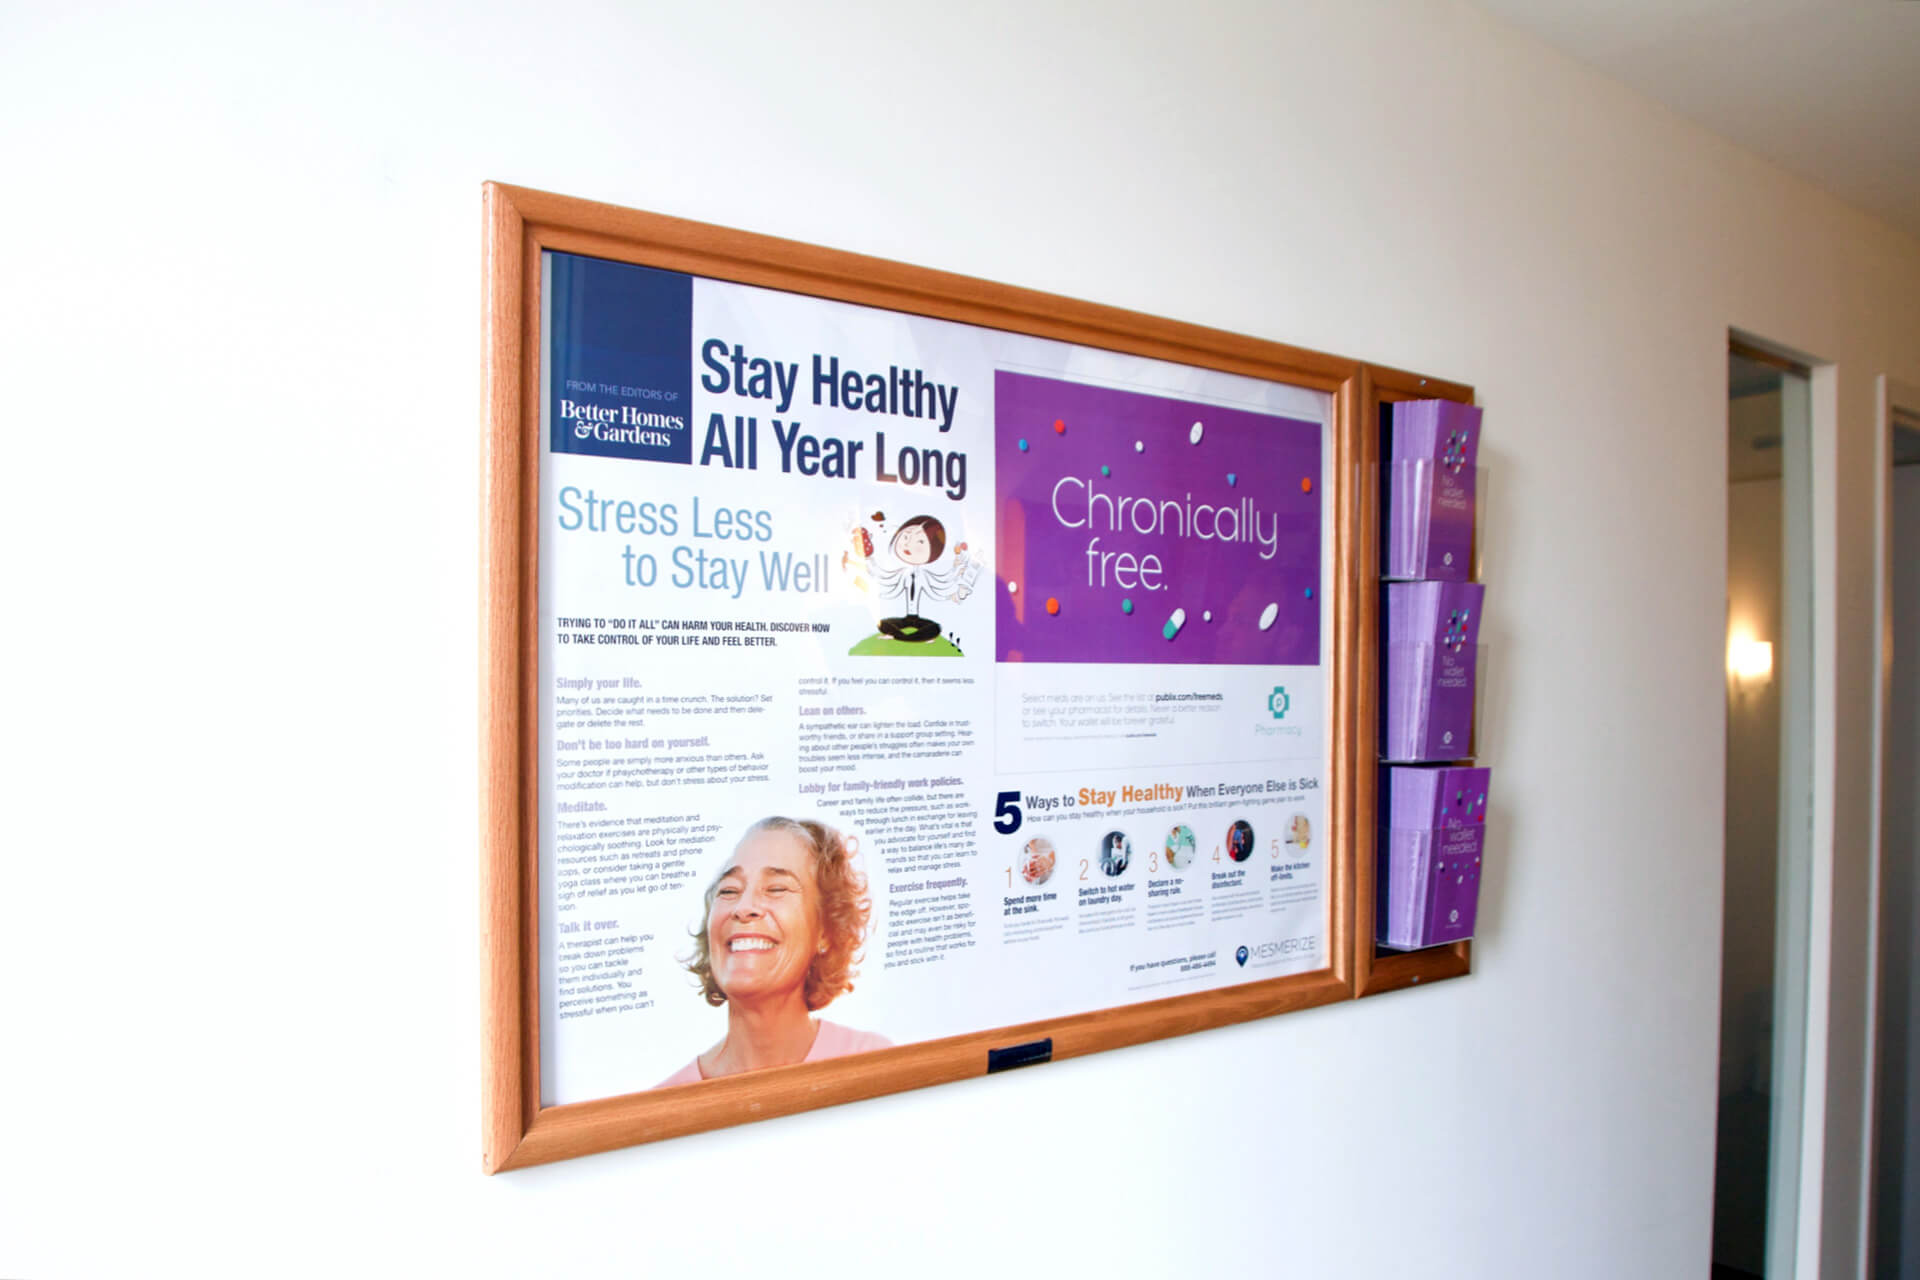 Wallboards educate health-conscious consumers within high traffic areas of doctor's office waiting and exam rooms and retail pharmacies.